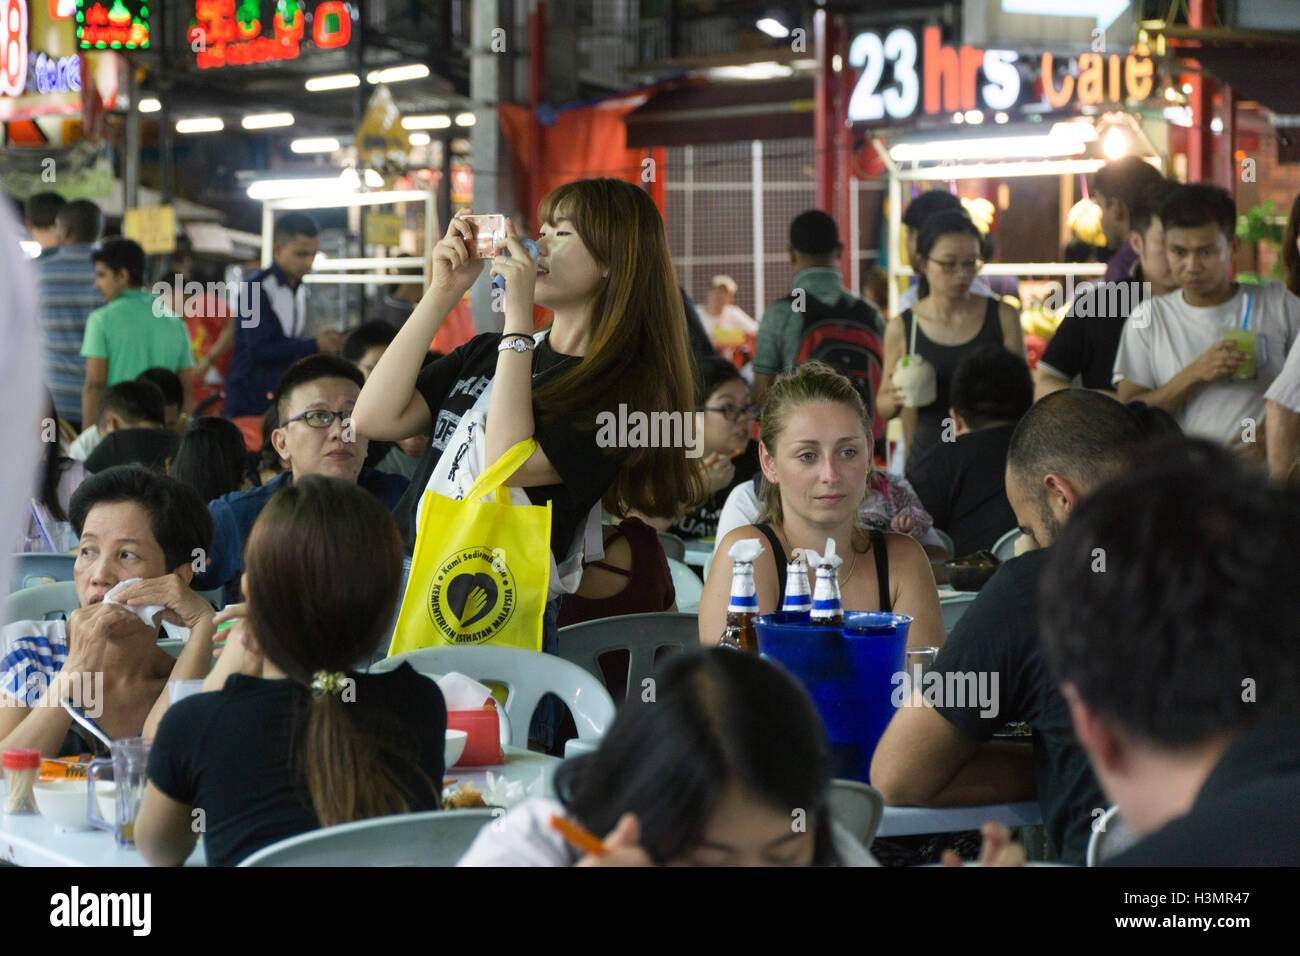 A young girl taking a photograph in the busy street food area of Jalan Alor,Kuala Lumpur,Malaysia, Stock Photo